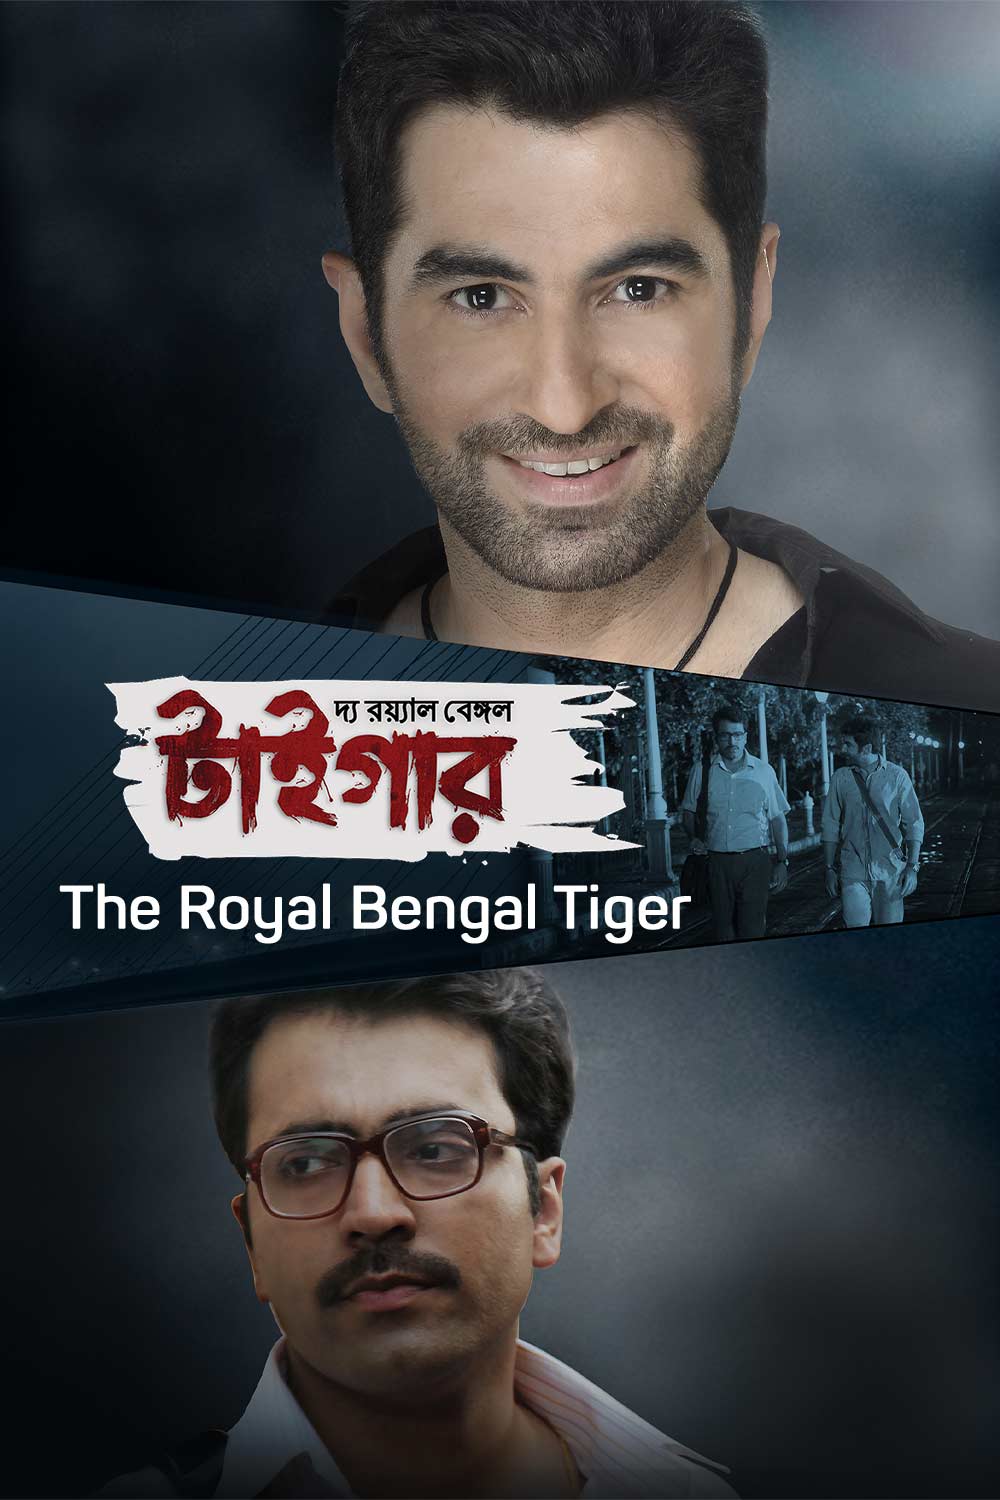 Watch Bengal Tiger Movie Online  Buy Rent Bengal Tiger On BMS Stream